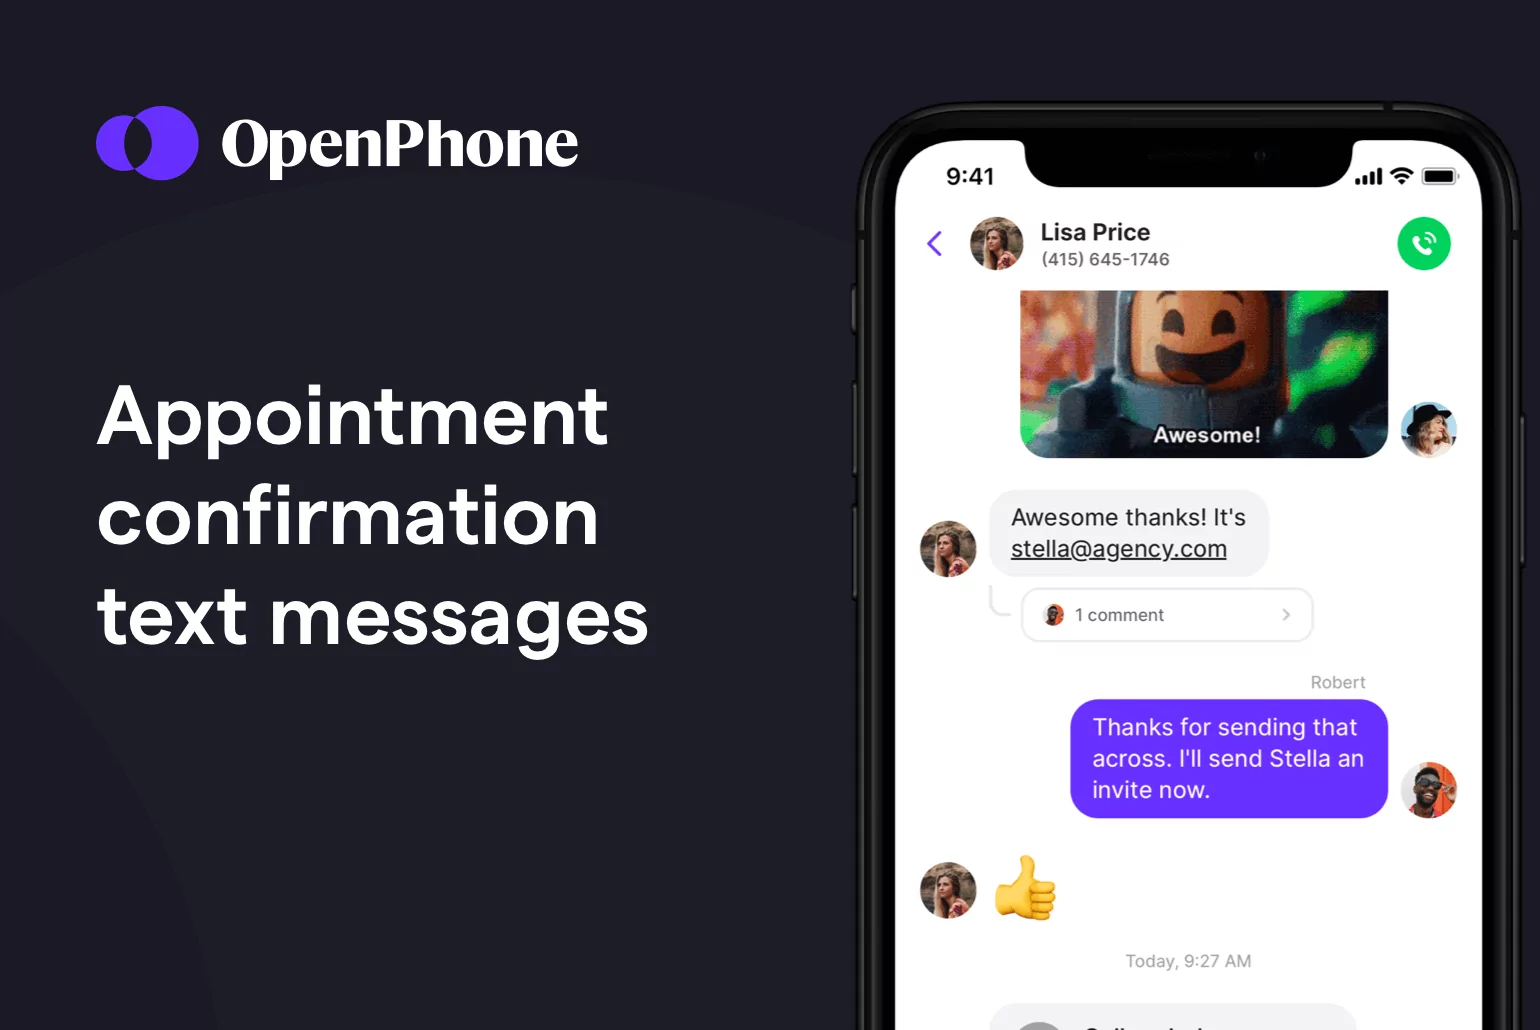 Appointment confirmation texts